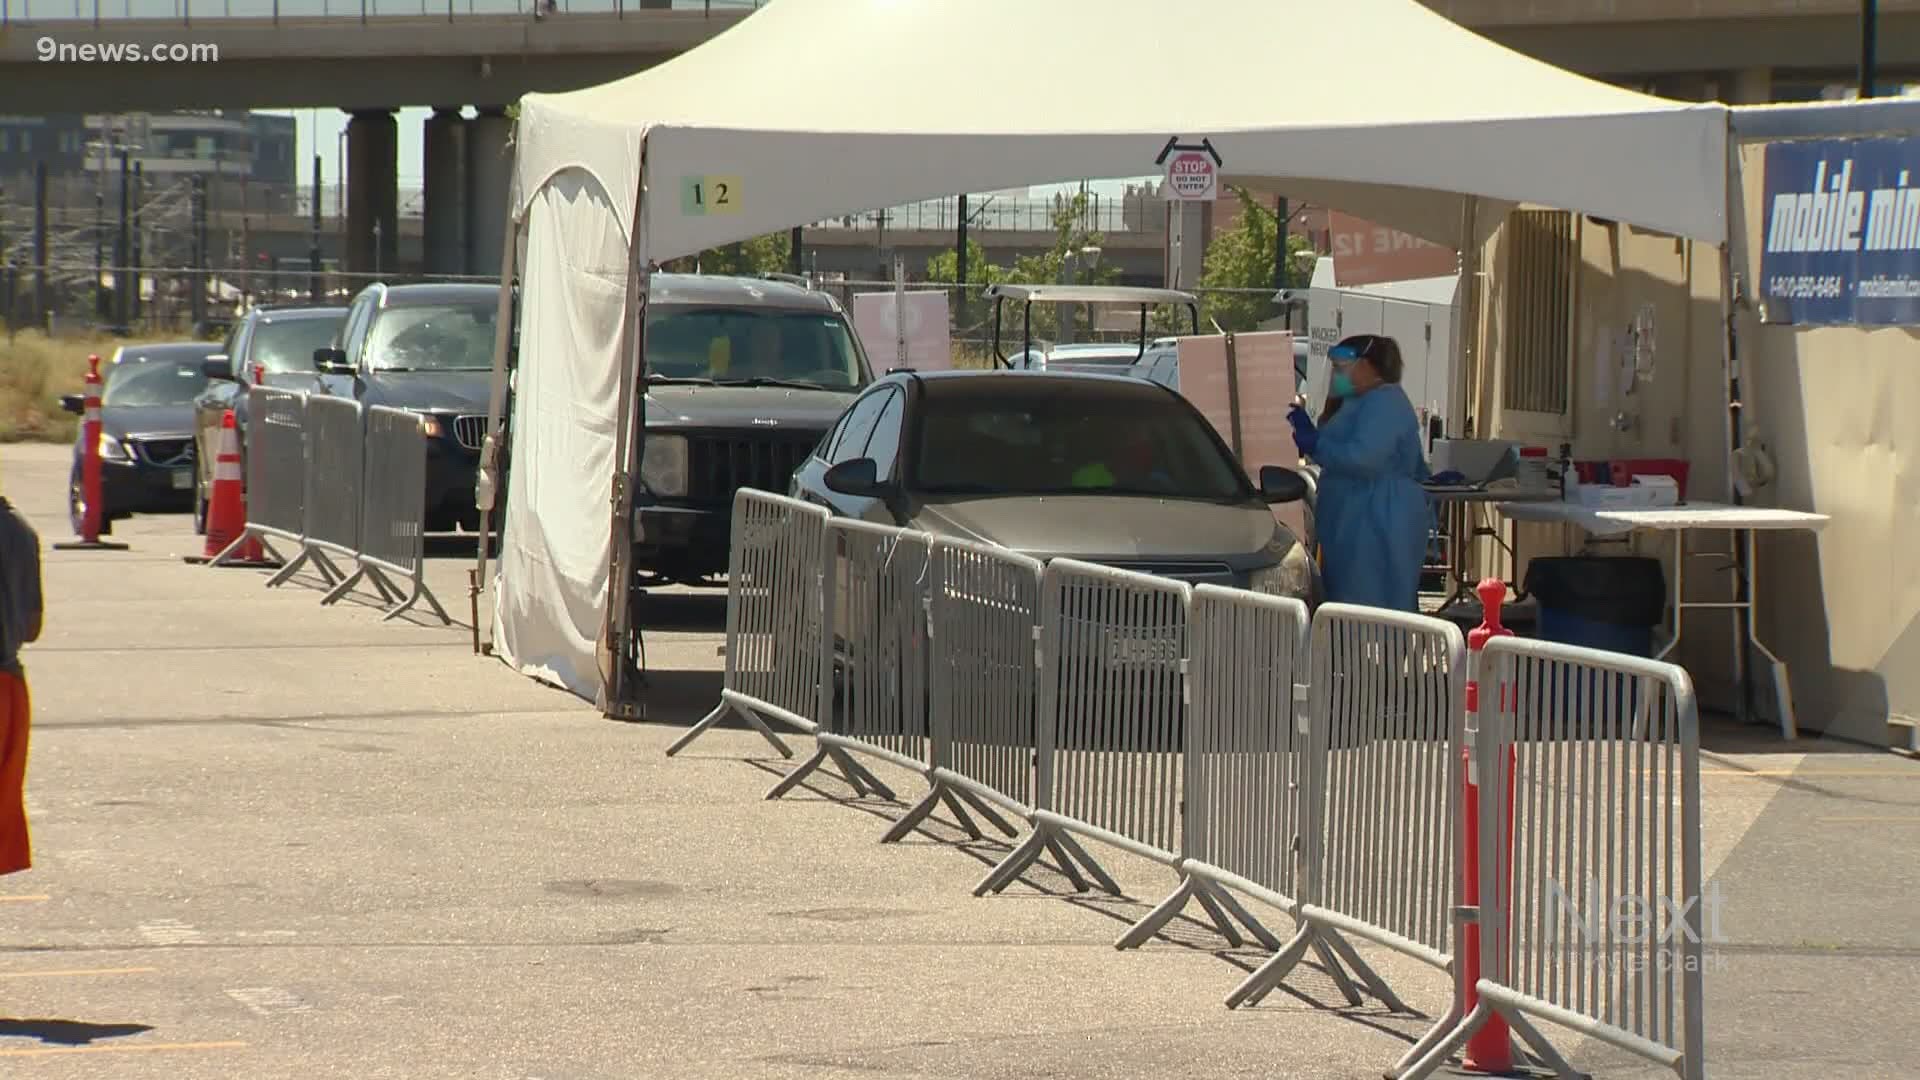 Some people report waiting 10 days after being tested for the coronavirus at the Pepsi Center, meaning some people could be contagious without knowing it.